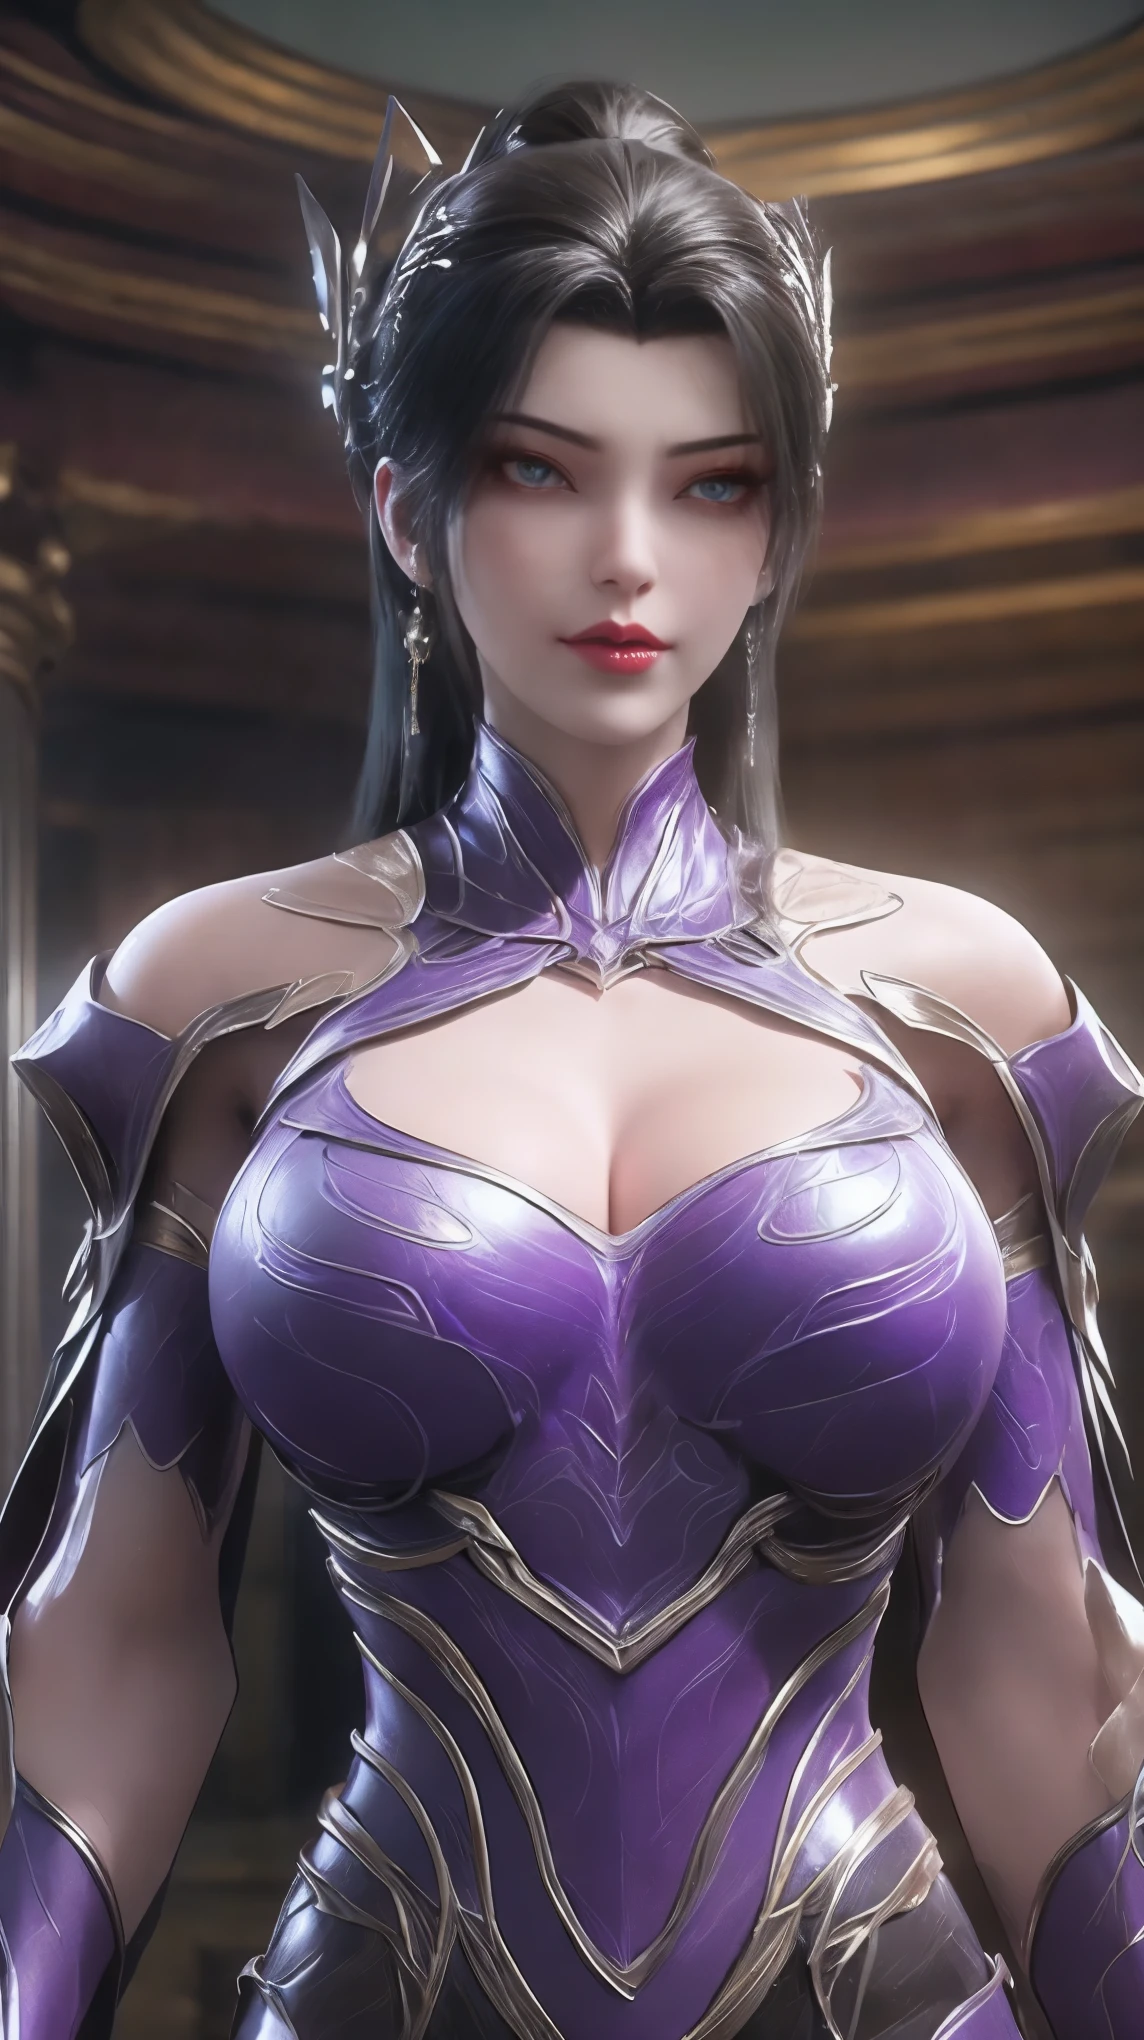 AI GIRL,SOLO,UPPER BODY CLOSE UP, ((BEAUTY BLACK HAIR)), (GIGANTIC FAKE BREAST:1.5), ((NSFW CLEAVAGE:1.5)), (MUSCLE ABS:1.3), (LED PURPLE SHINY FUTURISTIC MECHA CYBER CROP TOP, BLACK MECHA SKINTIGHT LEGGINGS,PORTRAIT:1.5), (MUSCULAR PERFECT BODY MATURE WOMAN, SWEATY BUSTY BODY:1.2), (LOOKING AT VIEWER:1.3), (female focus:0.8), (HALLROOM OF FUTURISTIC SPACE STATION:1), (BRIGHT LIGHT WHITE_ROOM:1.3), HYPER TEXTURE, (4X MSAA), ((UNREAL ENGINE 5 RENDER)), PHYSICALLY-BASED RENDERING, ULTRA HIGHT DEFINITION, 16K, 1080P.